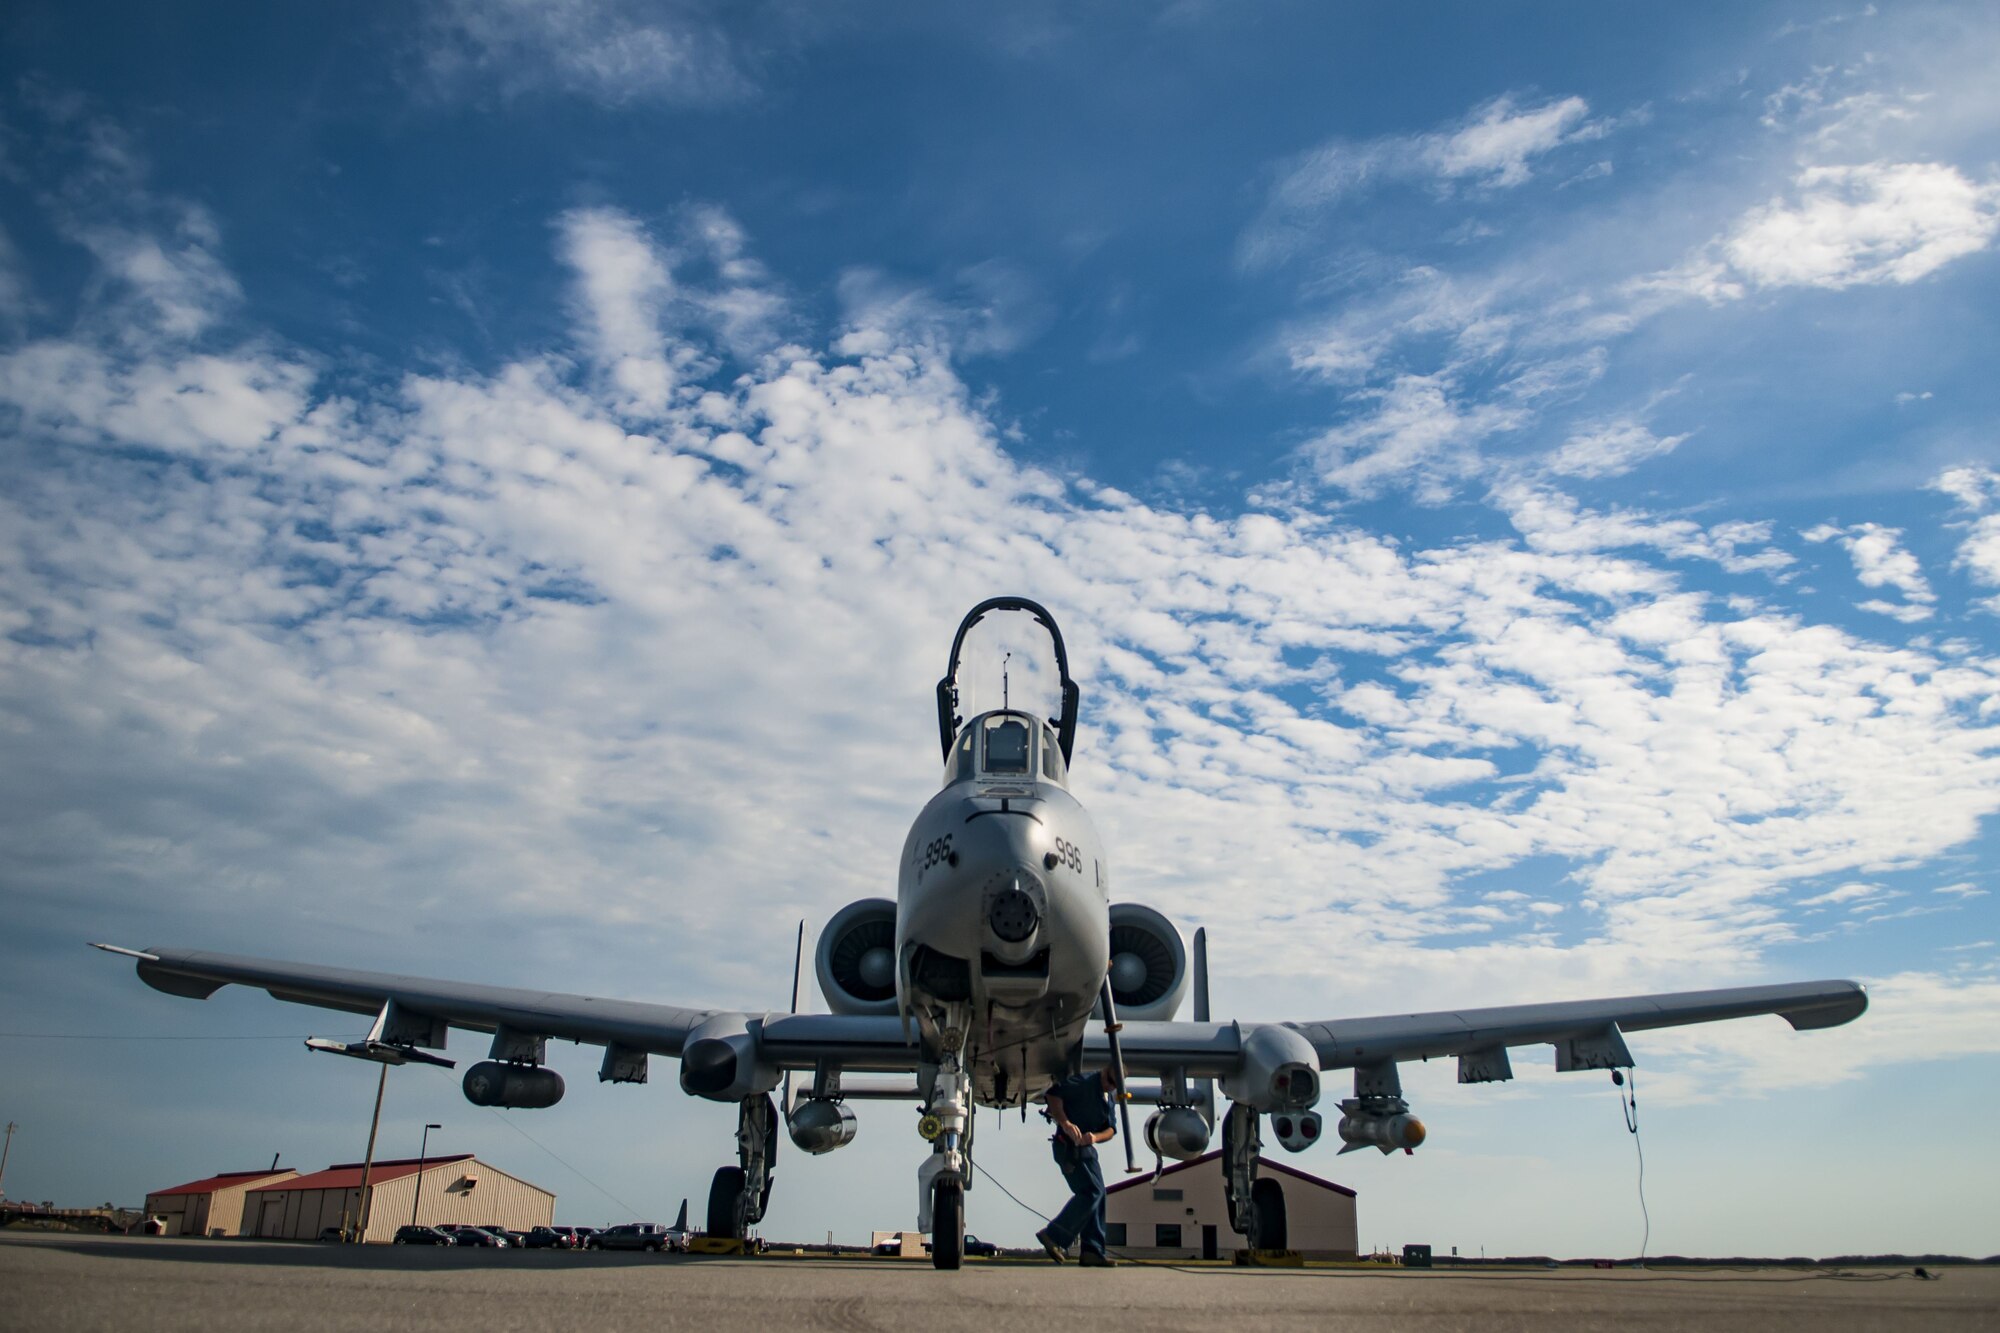 A pilot and crewchief with the 107th Fighter Squadron perform a preflight inspection on an A-10 Thunderbolt II, Feb. 2, 2018 at Patrick Air Force Base, Fla.